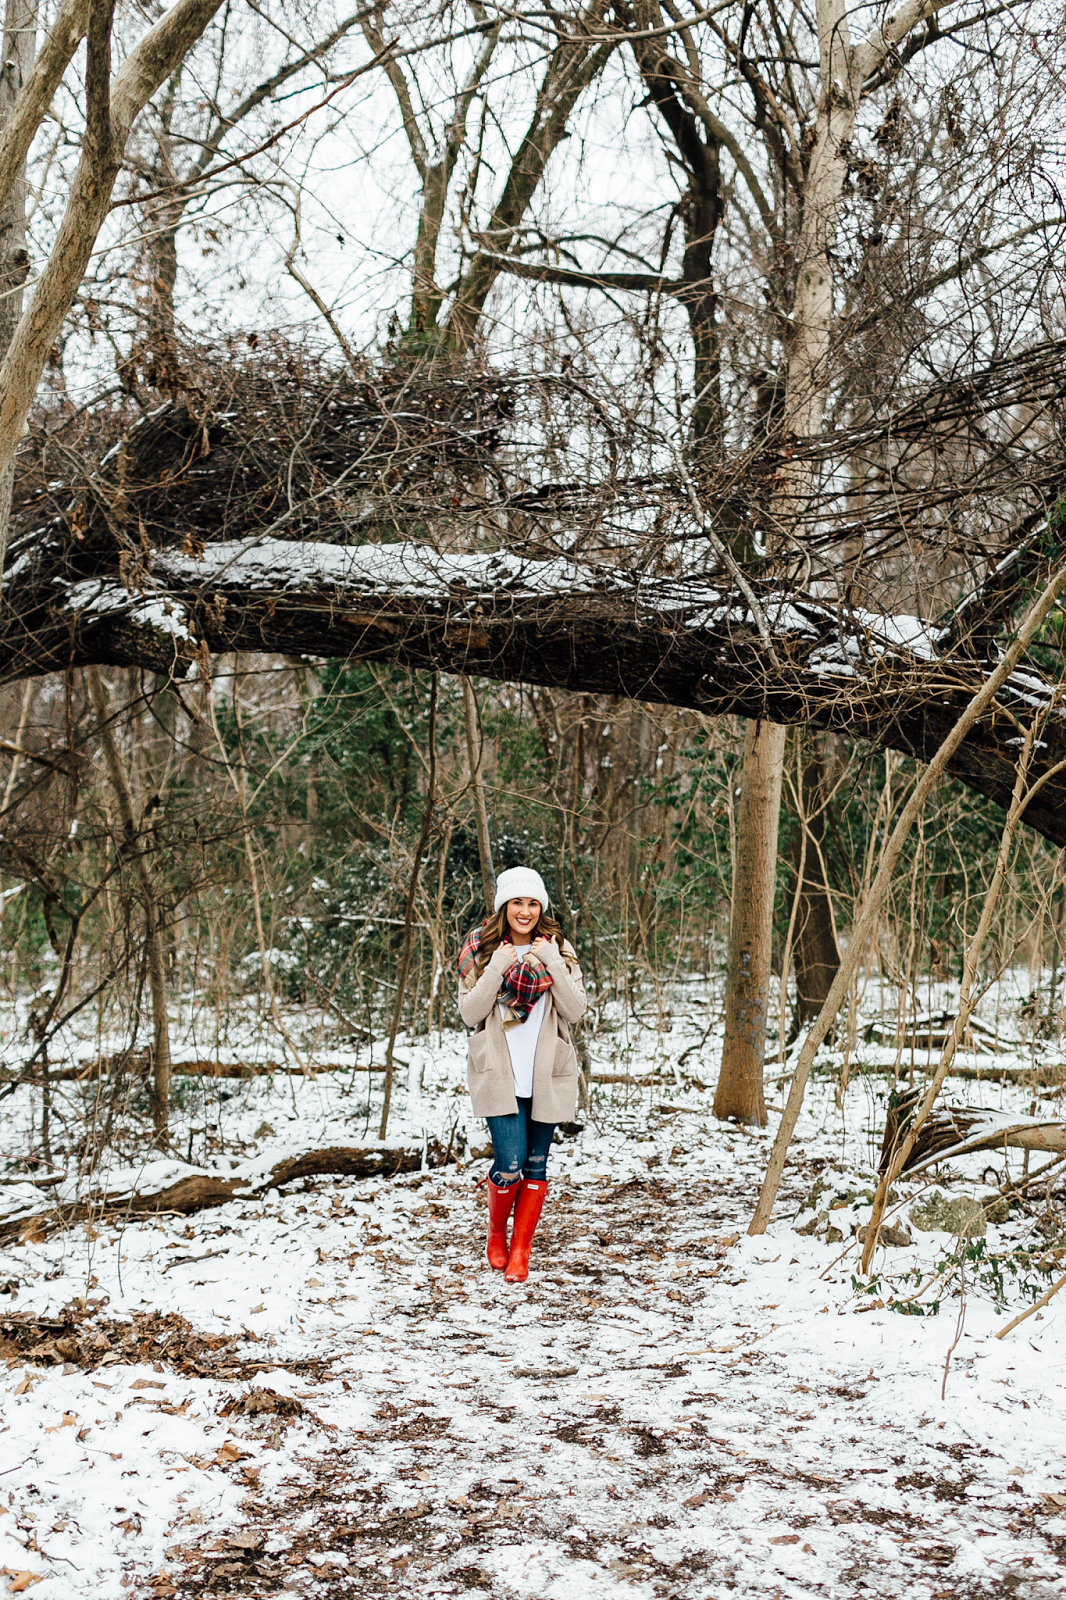 Ways to survive the winter: take a walk outside